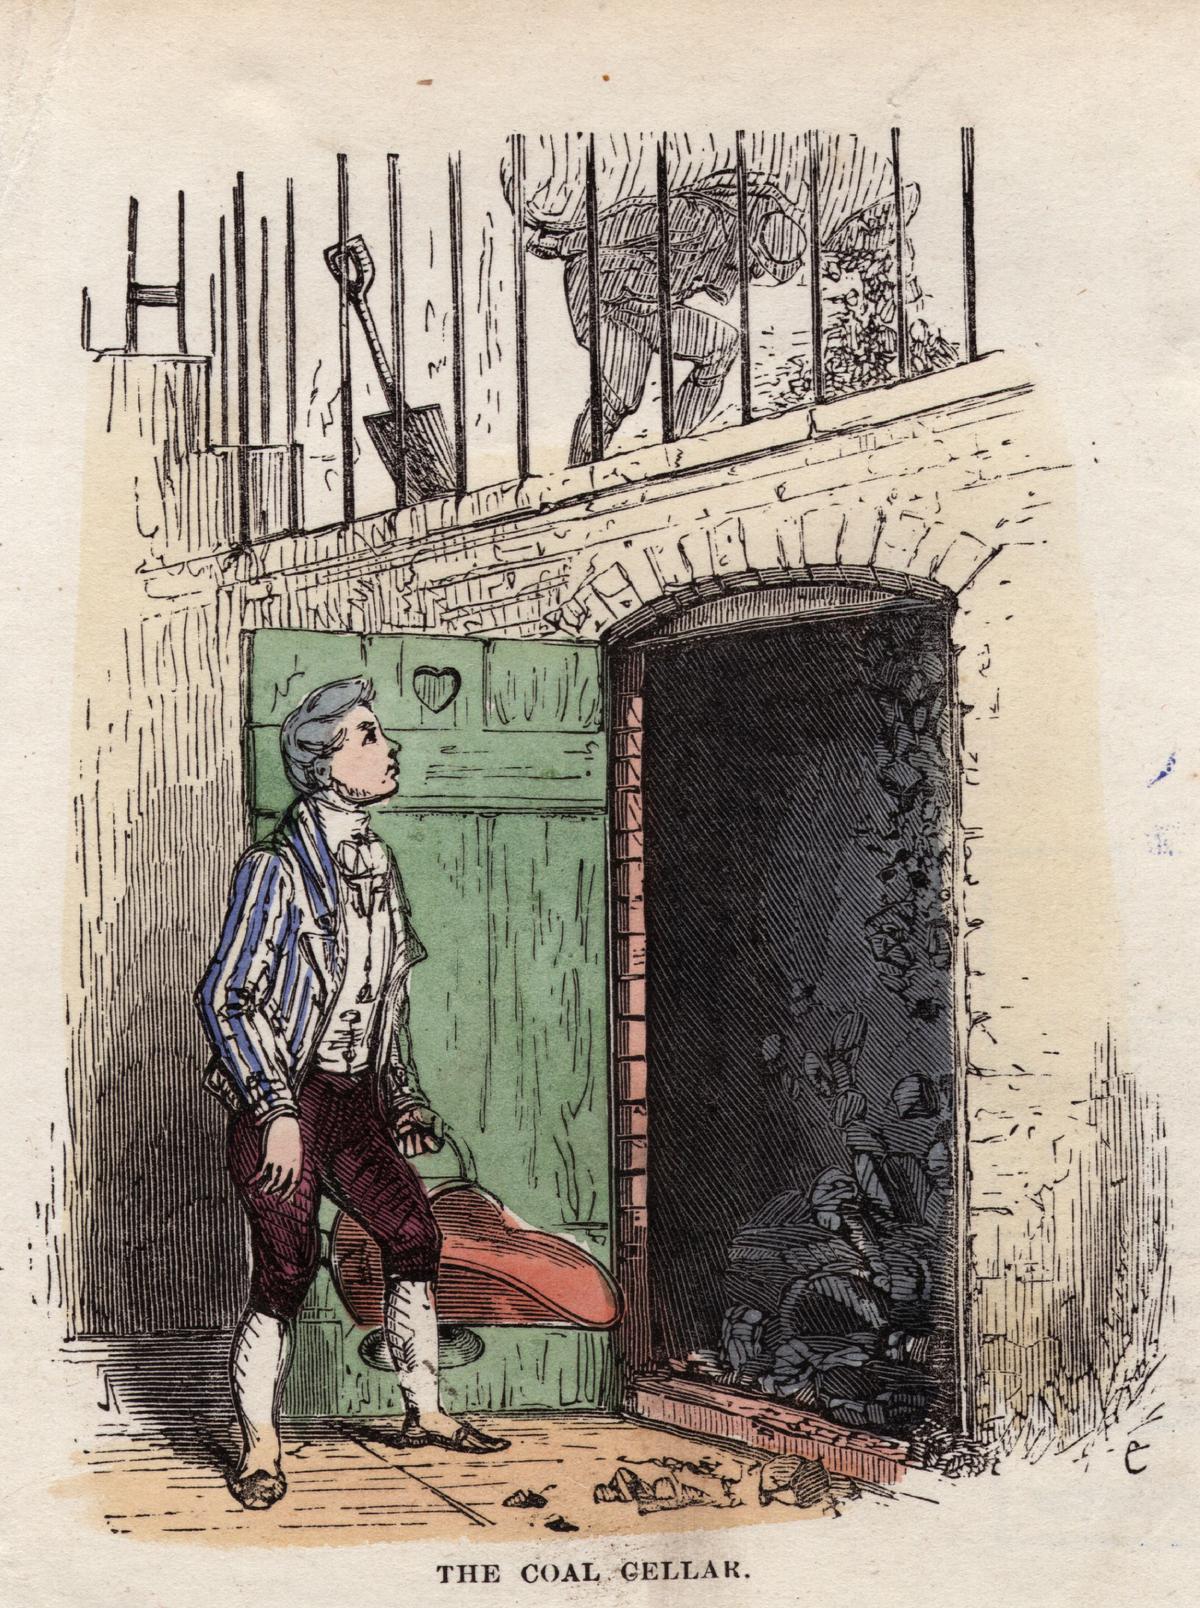 Illustration of a servant filling the coal scuttle after a delivery of coal to the coal cellar, circa 1790 (Hulton Archive/Getty Images)